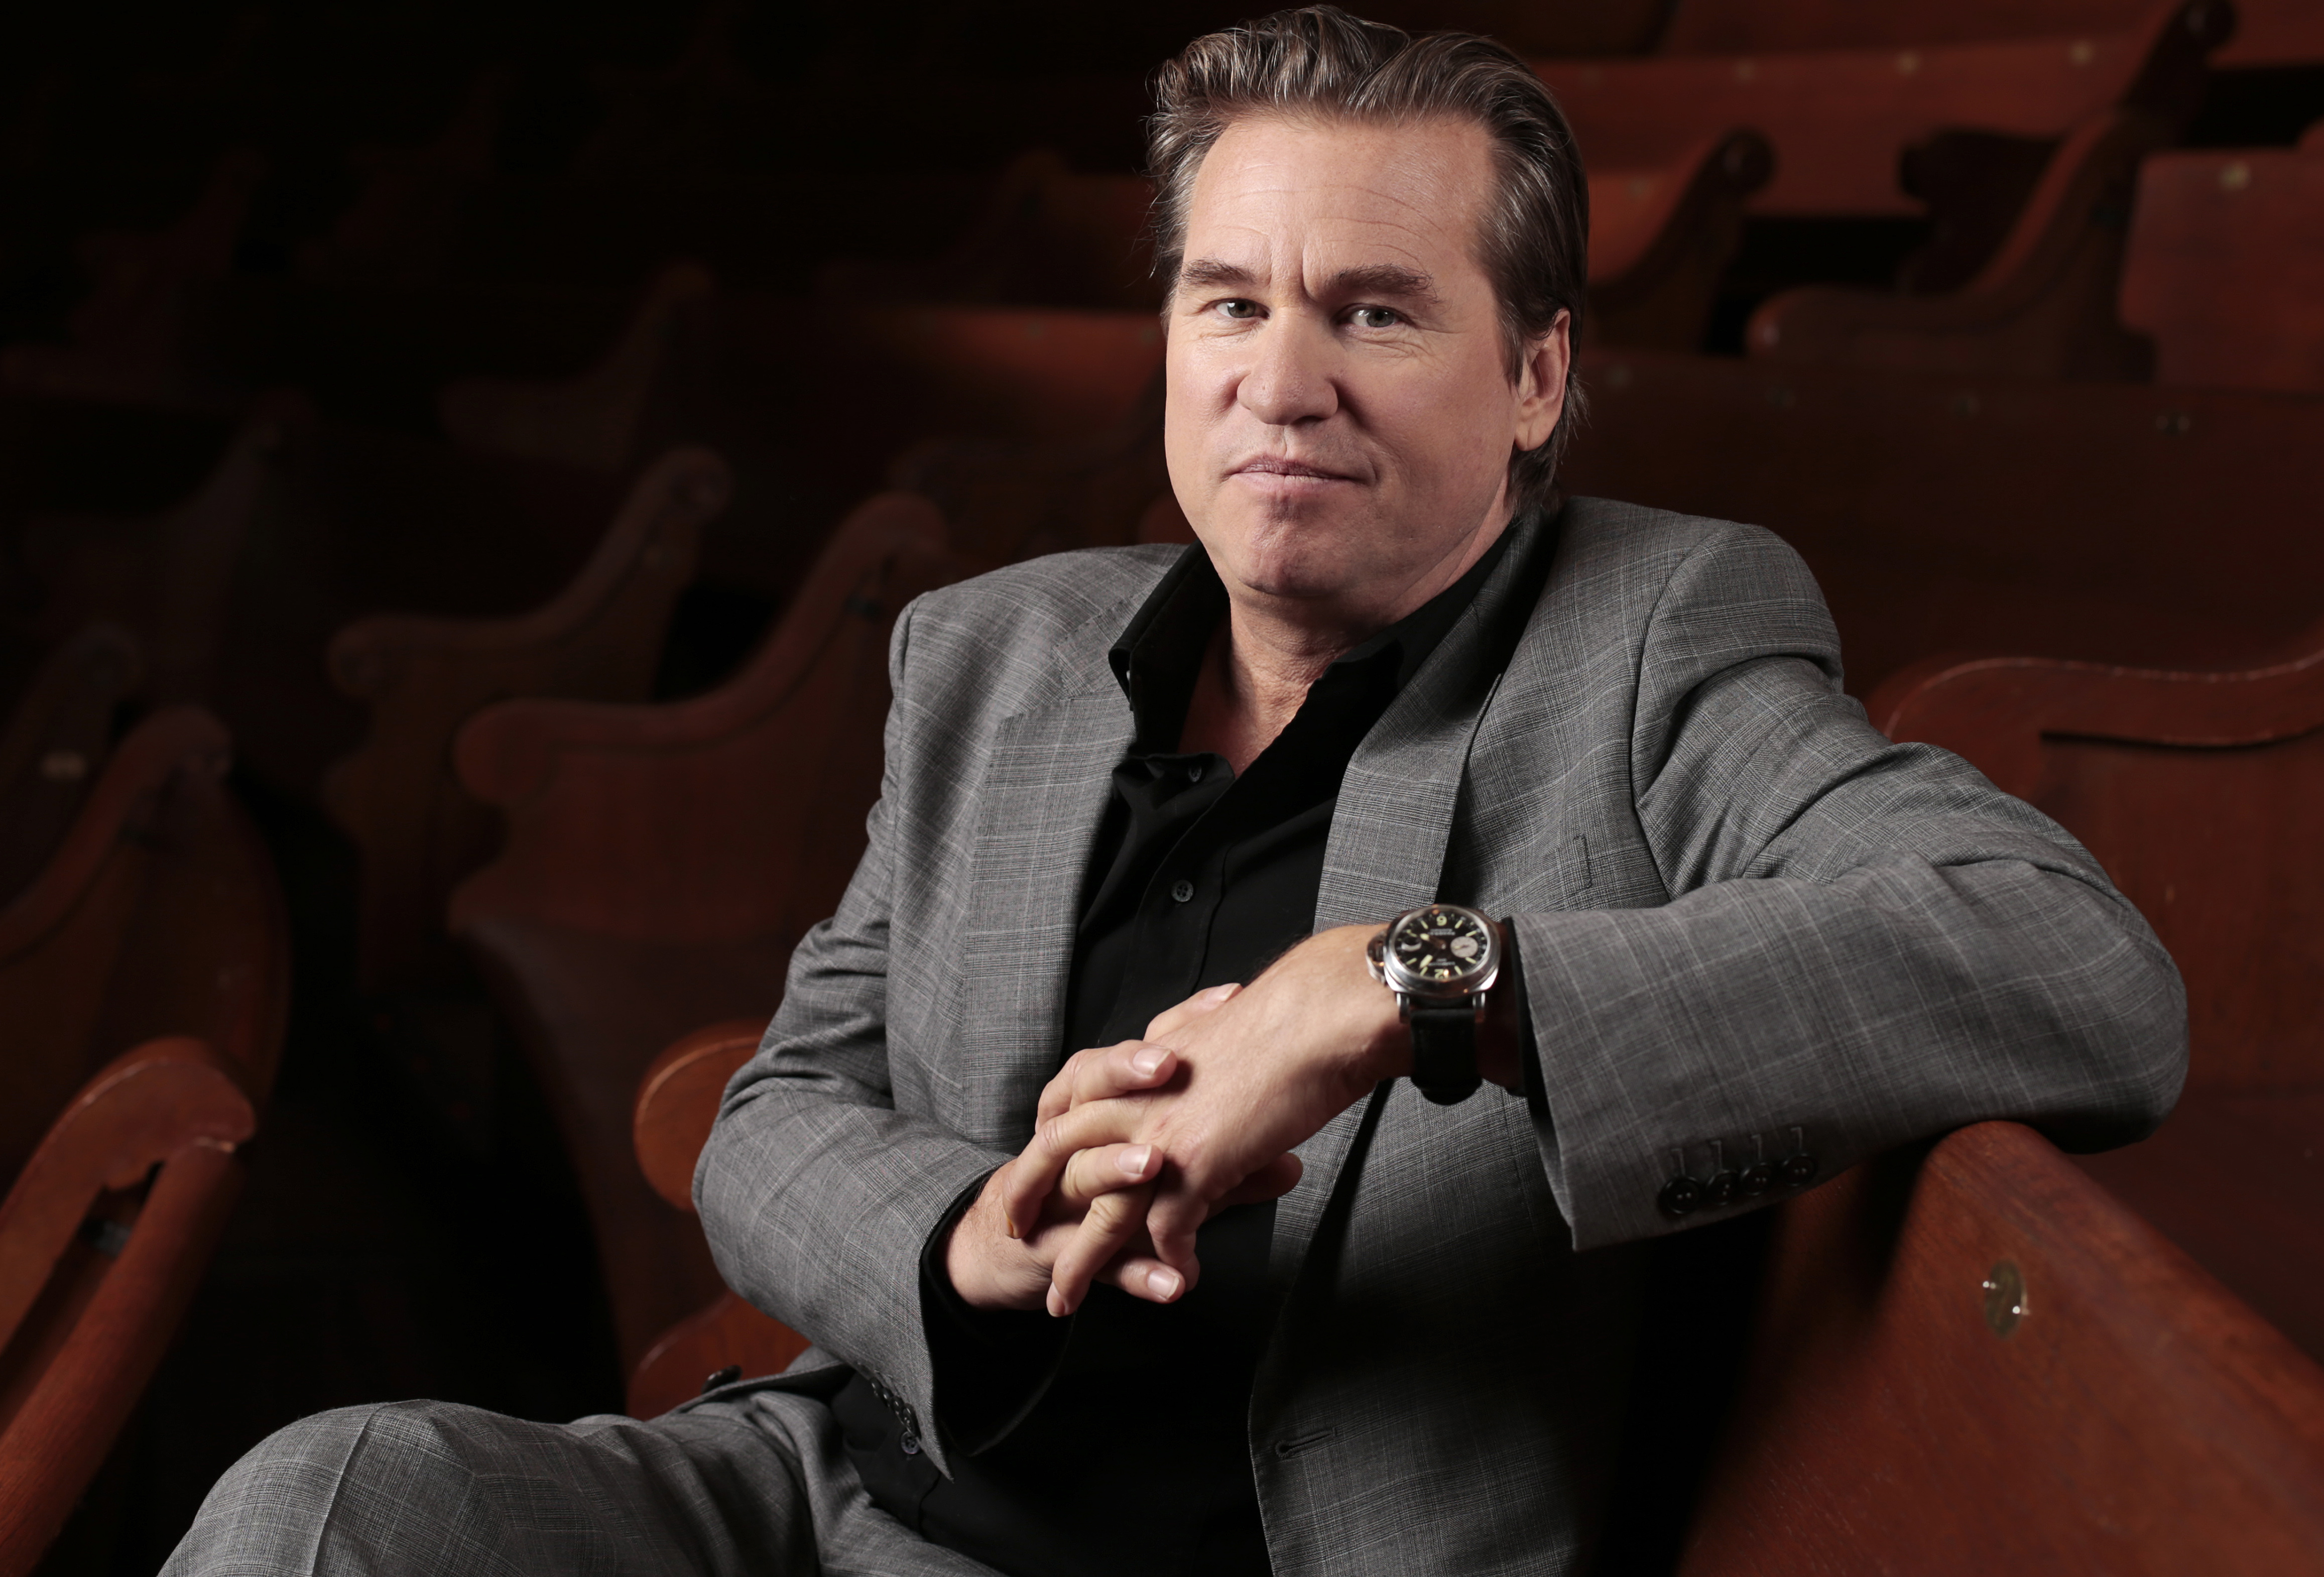 In this Jan. 9, 2014 photo, Val Kilmer poses for a portrait in Nashville, Tenn.  Kilmer is undergoing tests for a possible tumor, according to his representative.  Liz Rosenberg confirmed Saturday, Jan. 31, 2015 that the 55-year-old actor is at a Los Angeles hospital and that doctors are ìencouraged by his progressî and hopeful he will make a full recovery.  (AP Photo/Mark Humphrey)